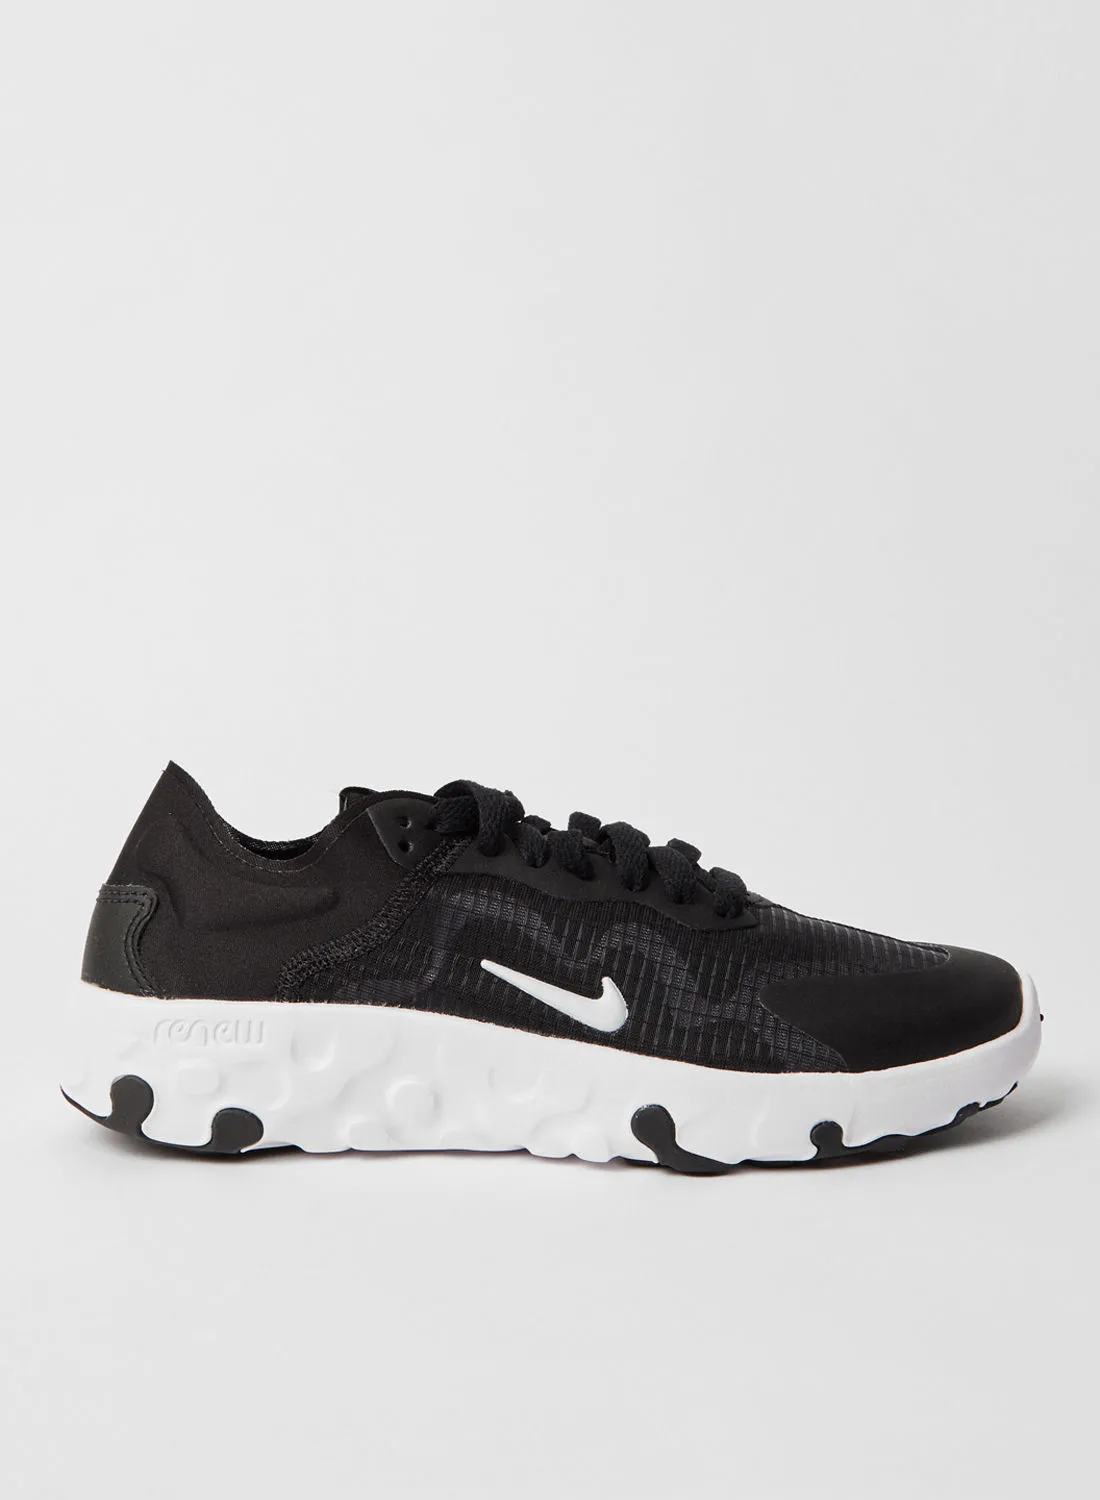 Nike Renew Lucent Running Shoes Black/White